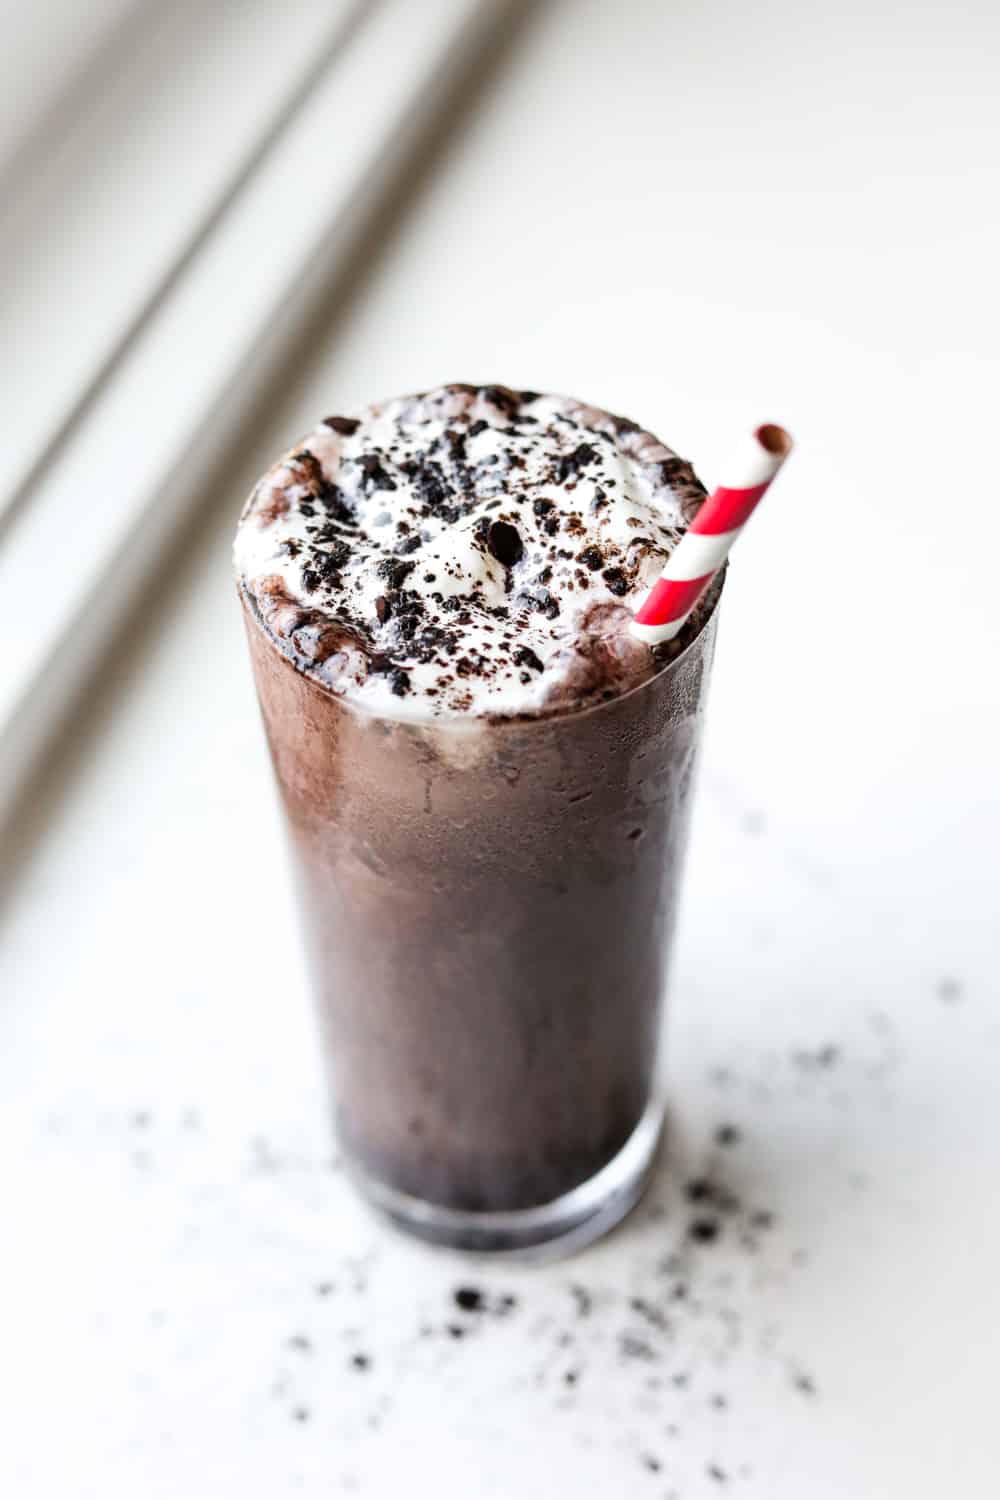 A glass full a chocolate shake. The shake is topped with whipped cream and black cocoa powder.